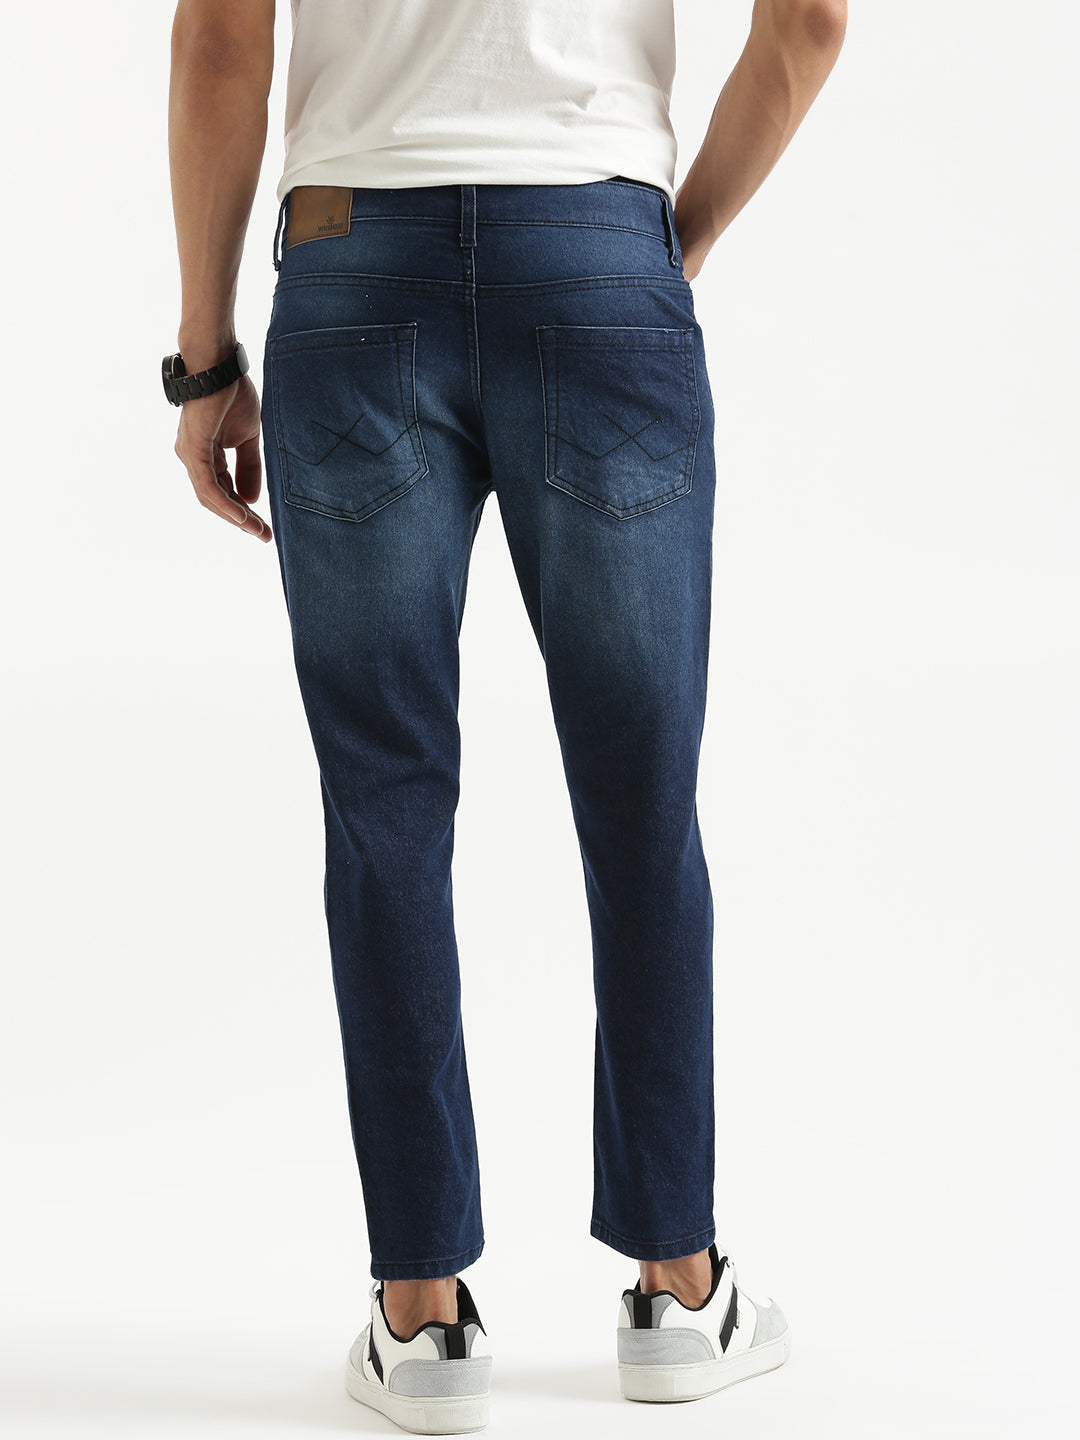 Wrogn Edition Skinny Fit Jeans